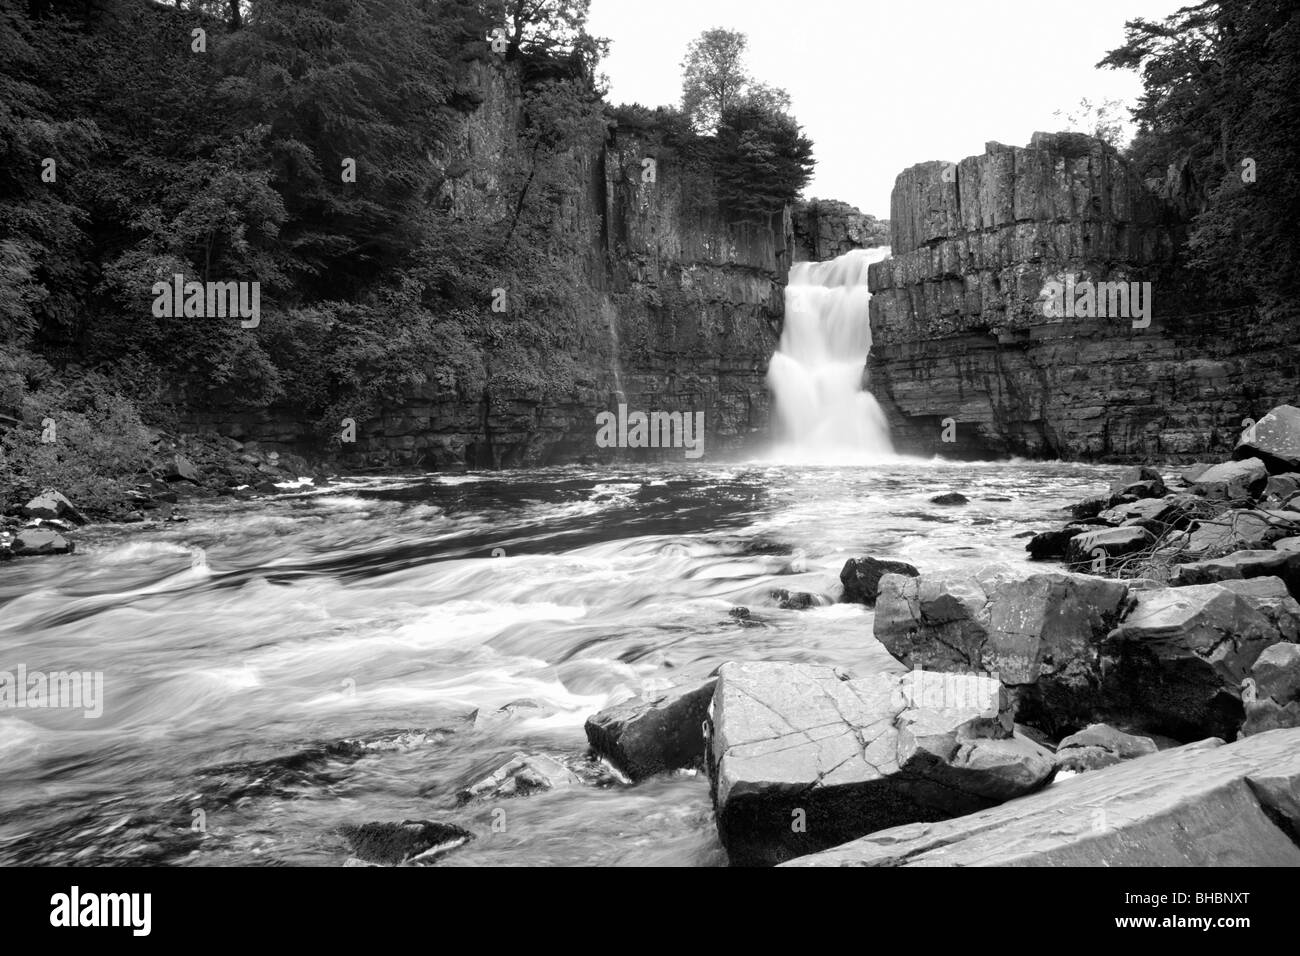 Middleton-in-Teesdale, County Durham, England. High Force, England's biggest waterfall, on the River Tees. Stock Photo